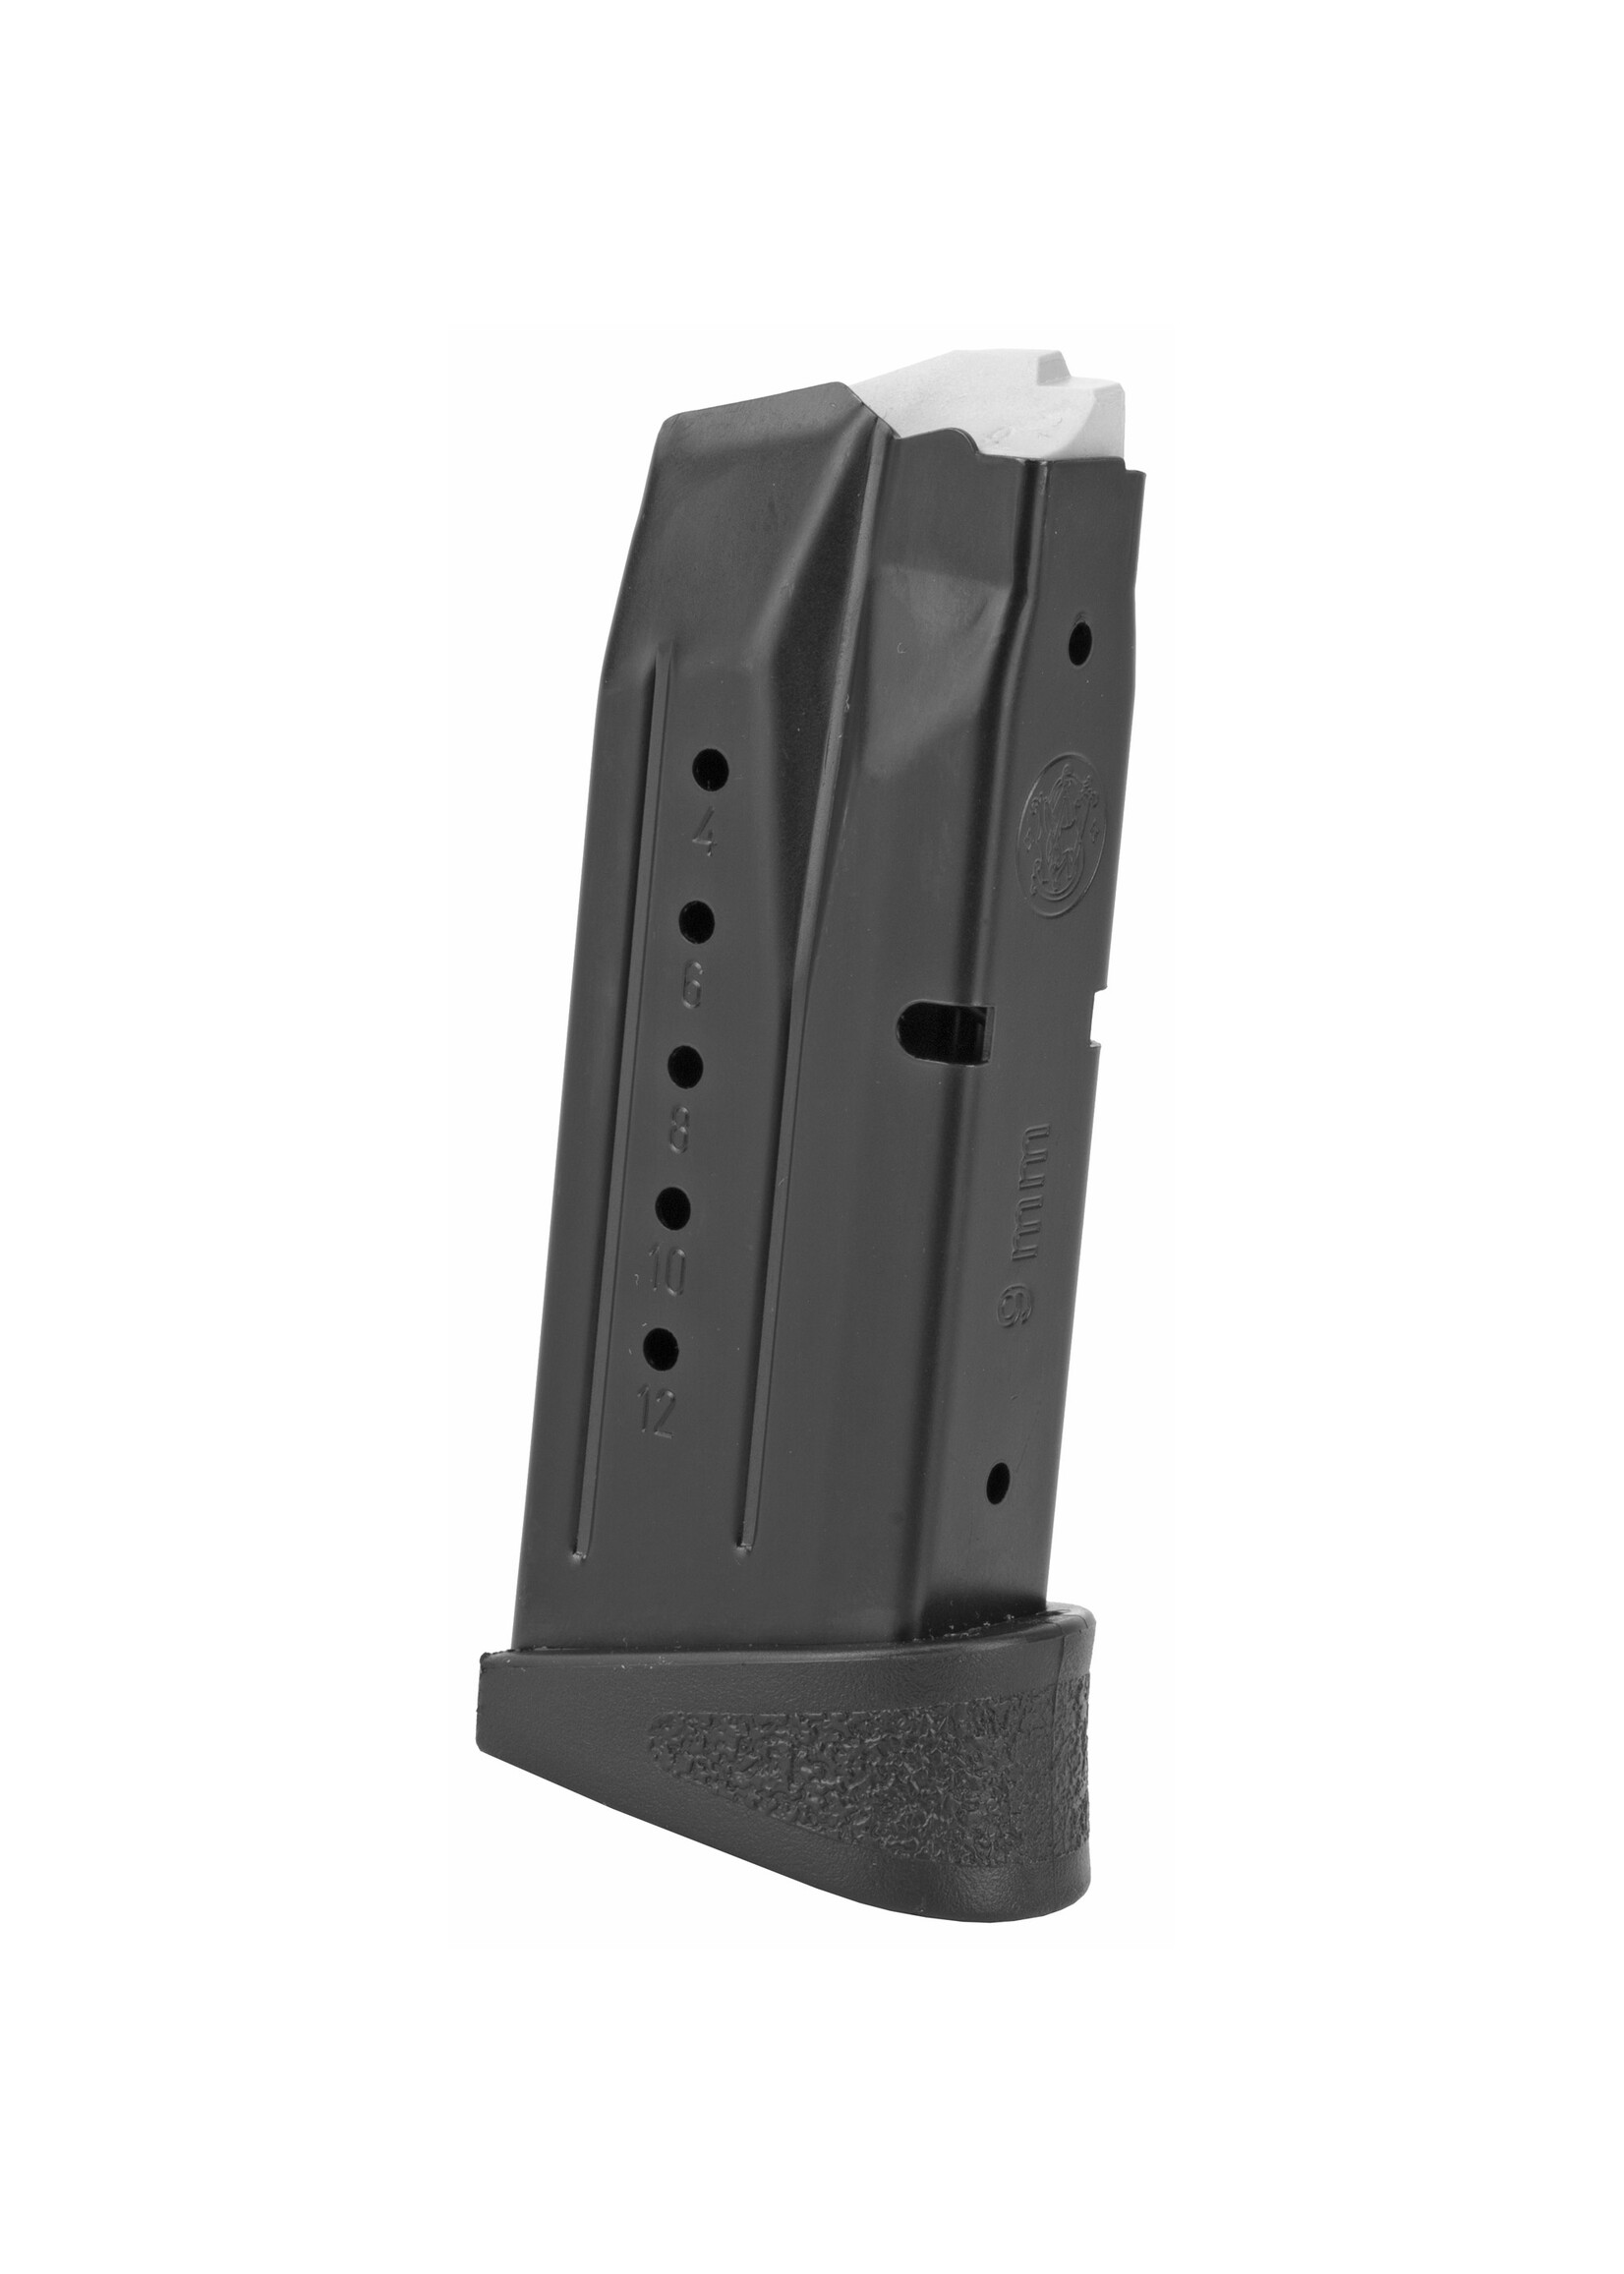 SMITH & WESSON SMITH & WESSON M&P 9 COMPACT 9MM 12RD MAGAZINE